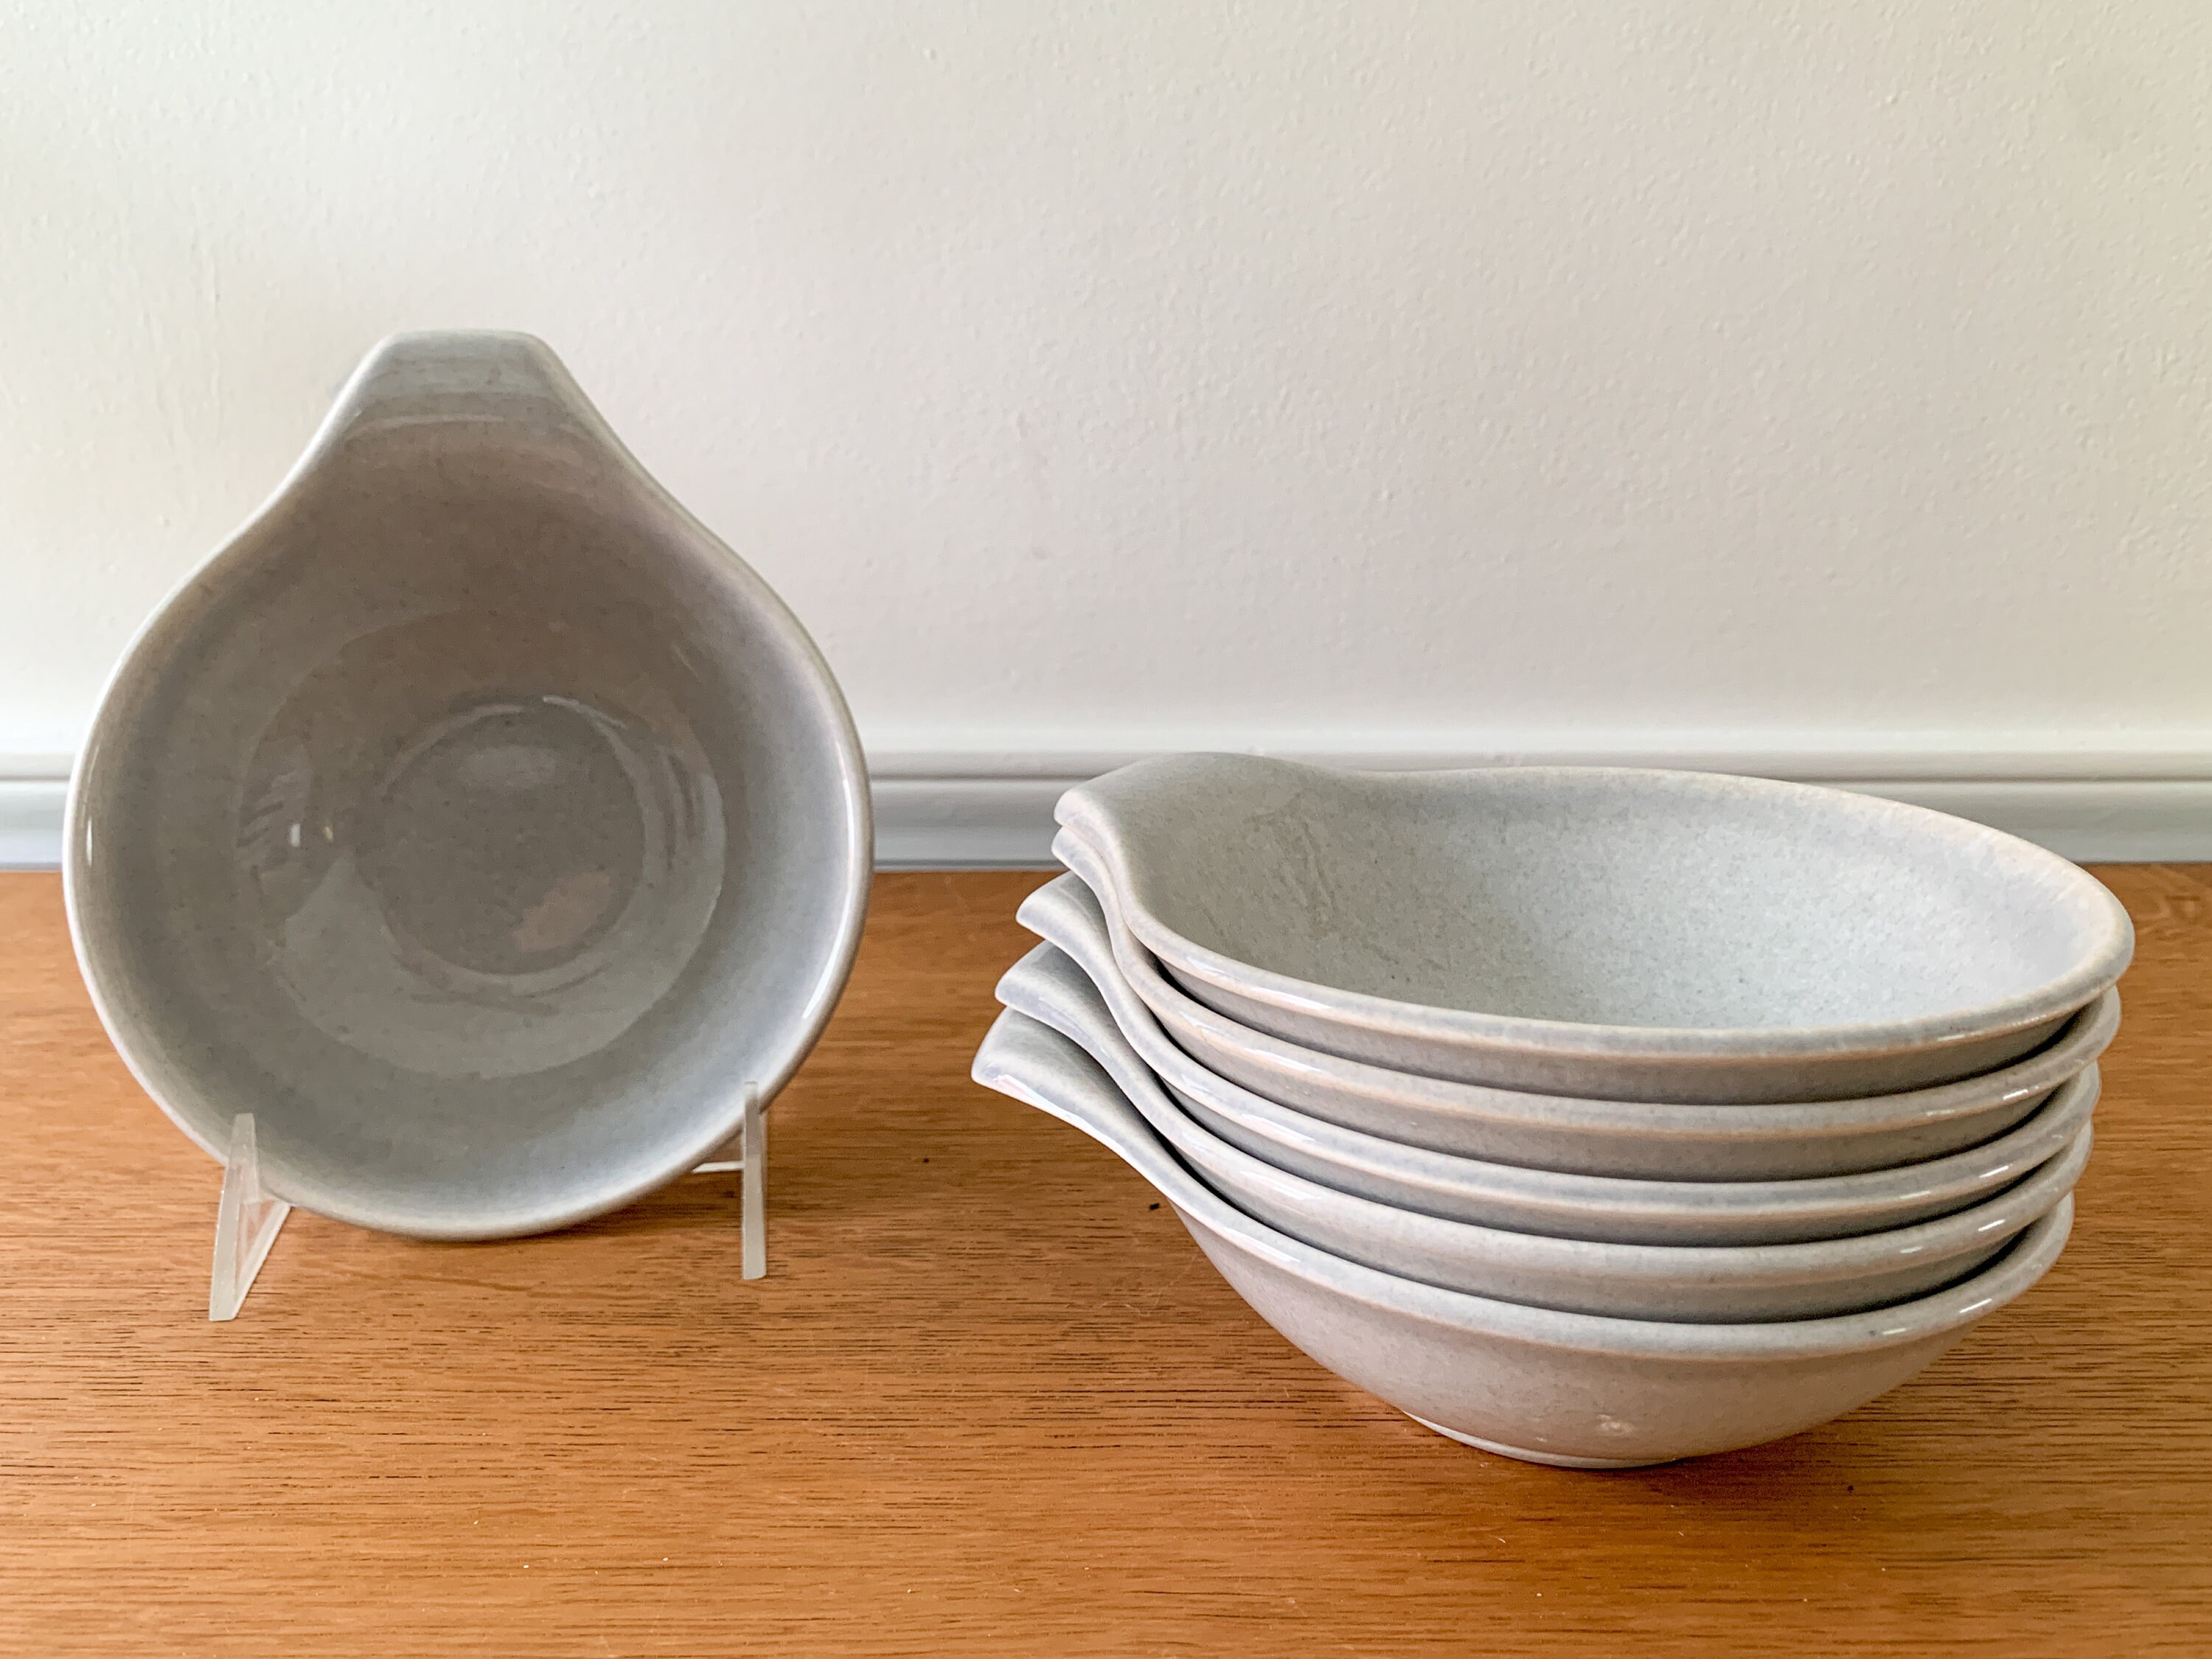 Mid Century Modern Dinnerware and Serveware. 8 Russel Wright American Modern 7 Lug Bowls in Granite Gray for Steubenville Pottery Company